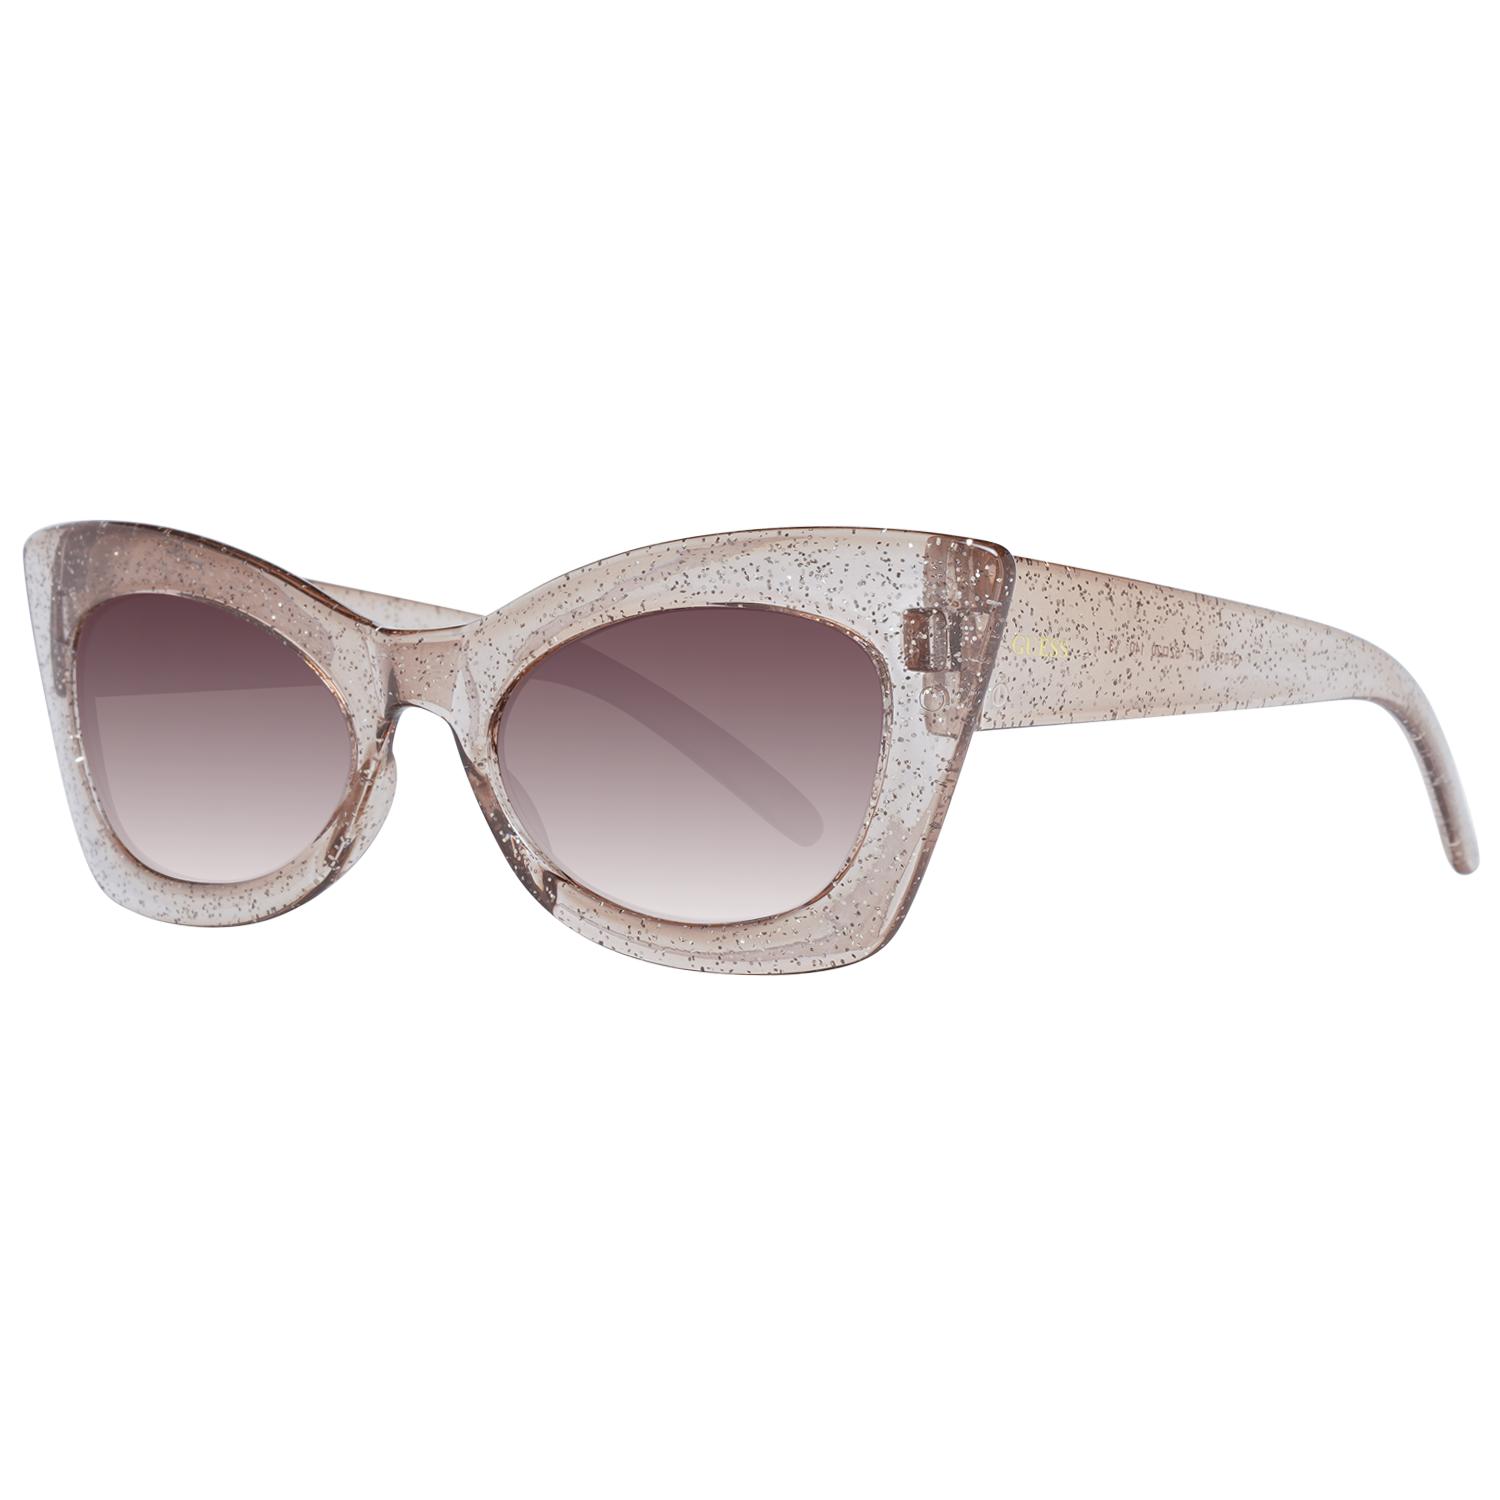 Guess Sunglasses in Brown | Lyst UK